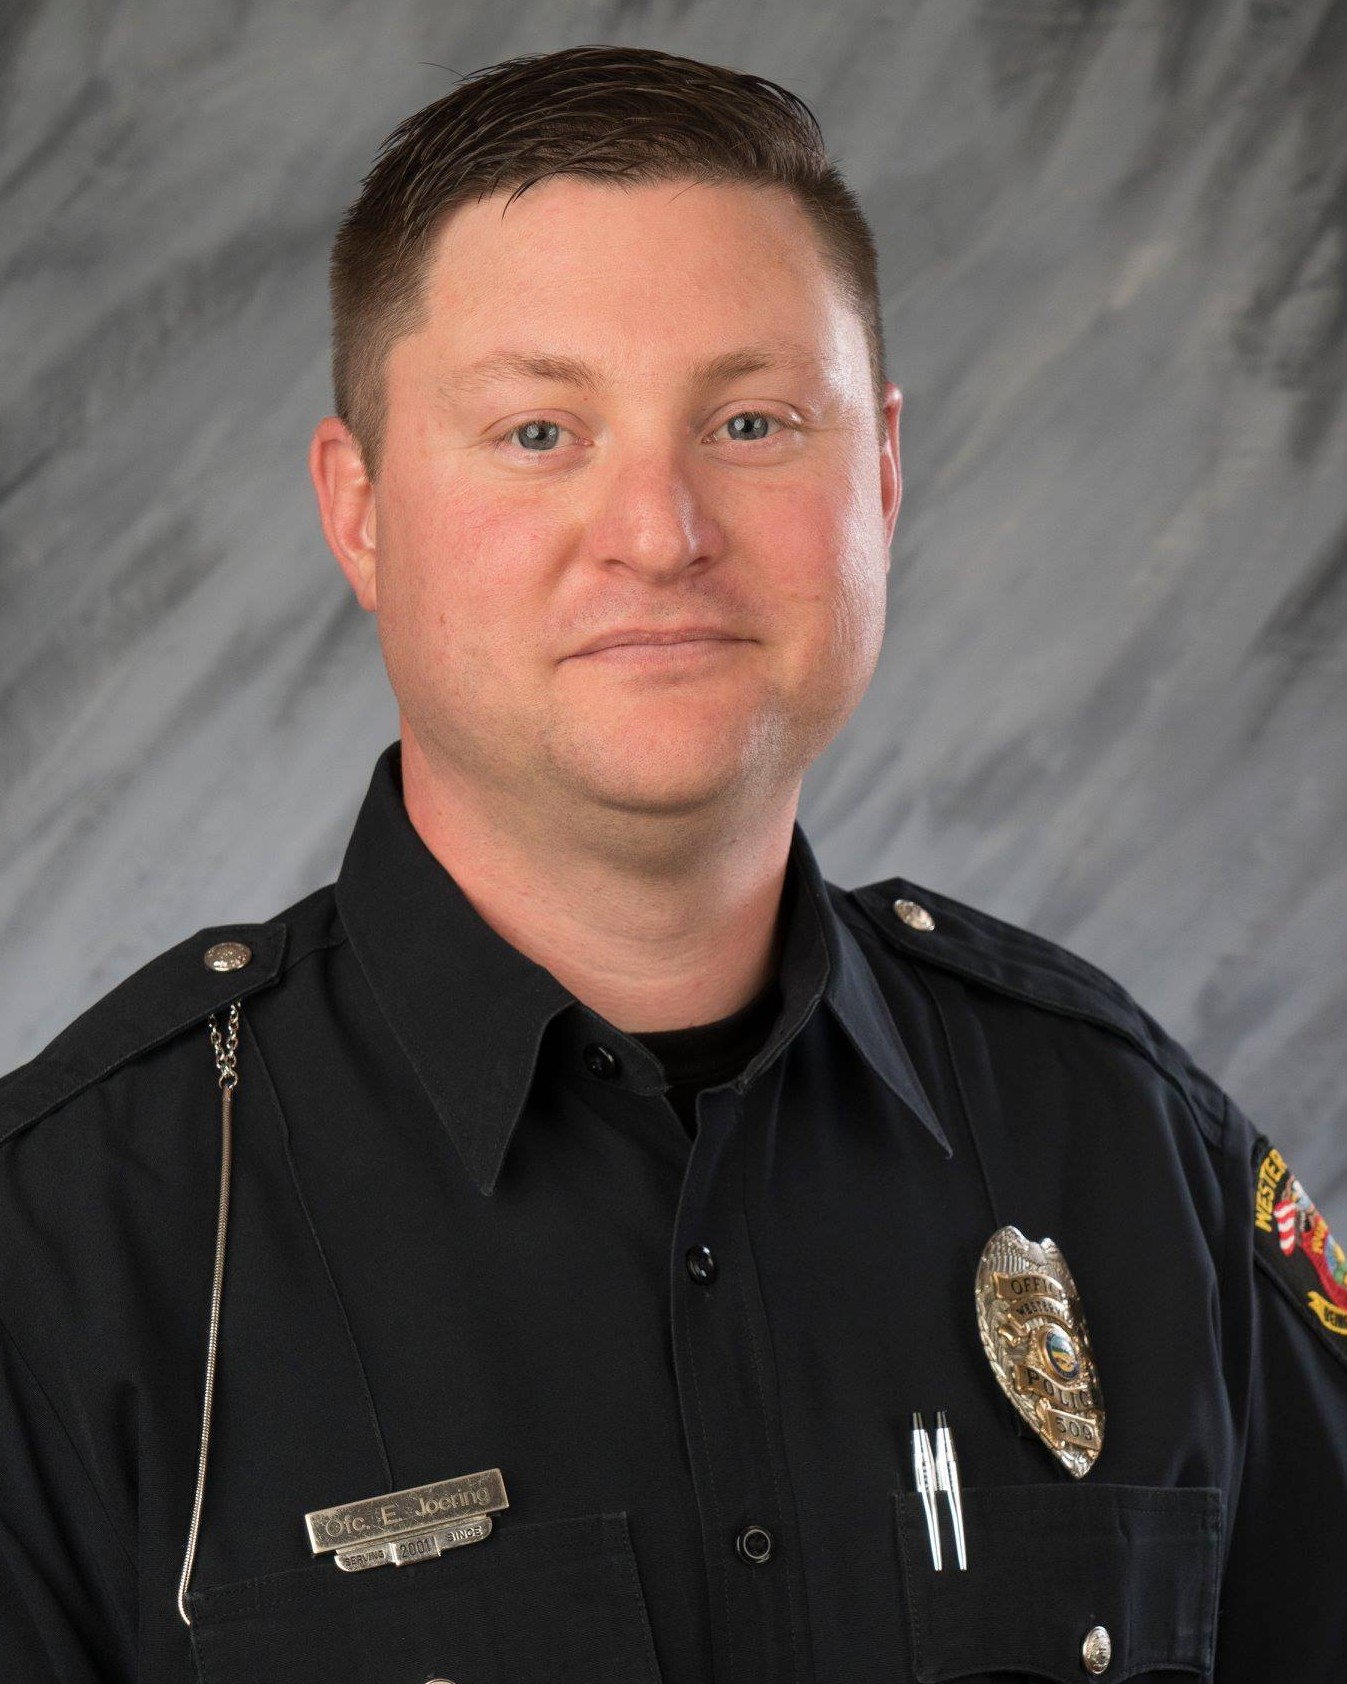 Police Officer Eric Joseph  Joering | Westerville Division of Police, Ohio